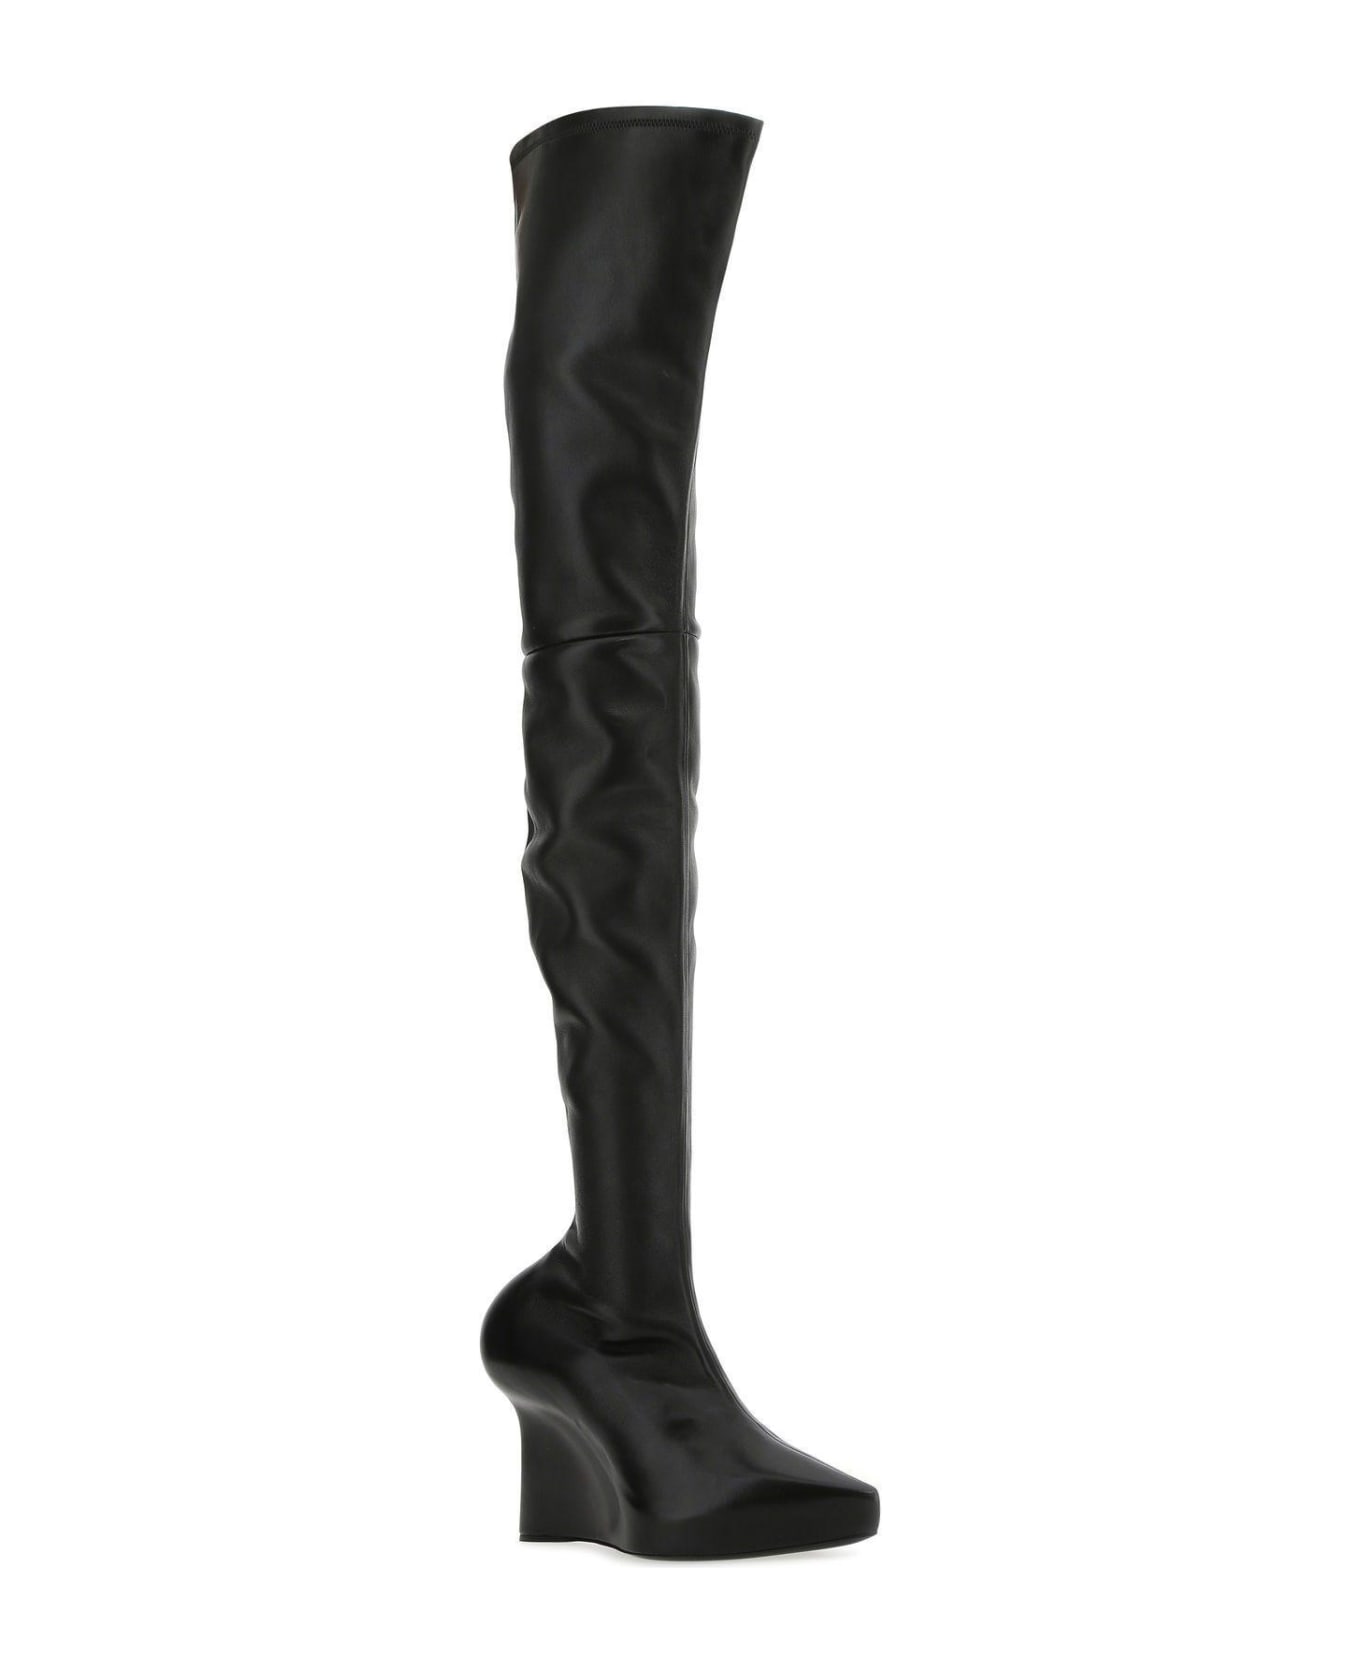 Givenchy Black Nappa Leather Show Boots - Black ブーツ